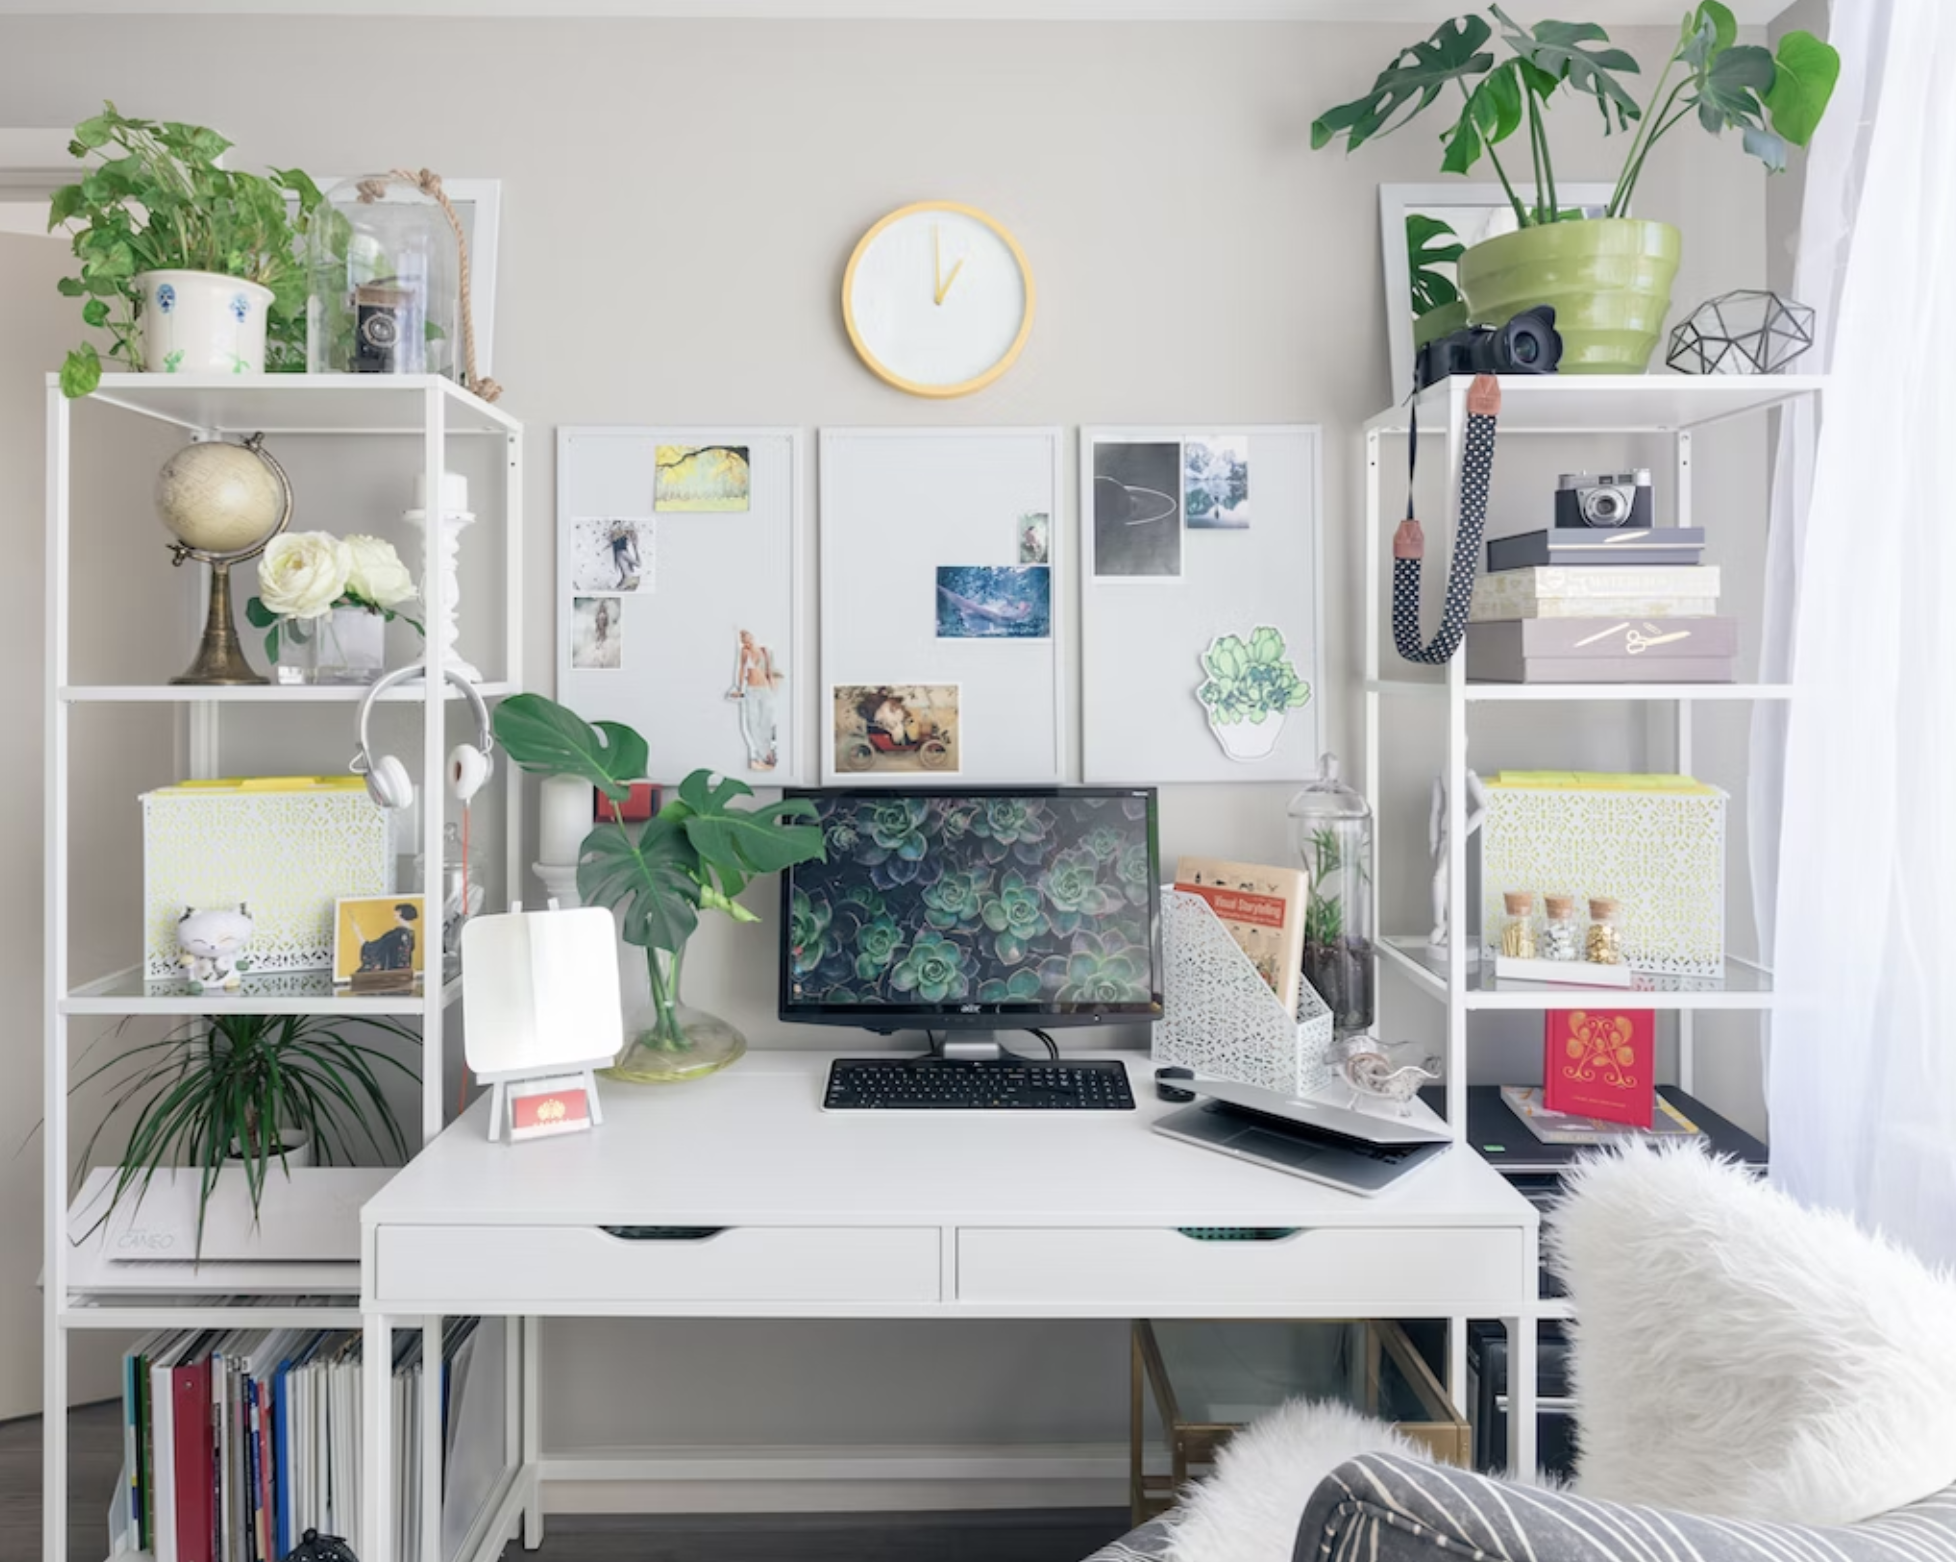 5 Tips to Rearrange a Room into a Workplace at Home